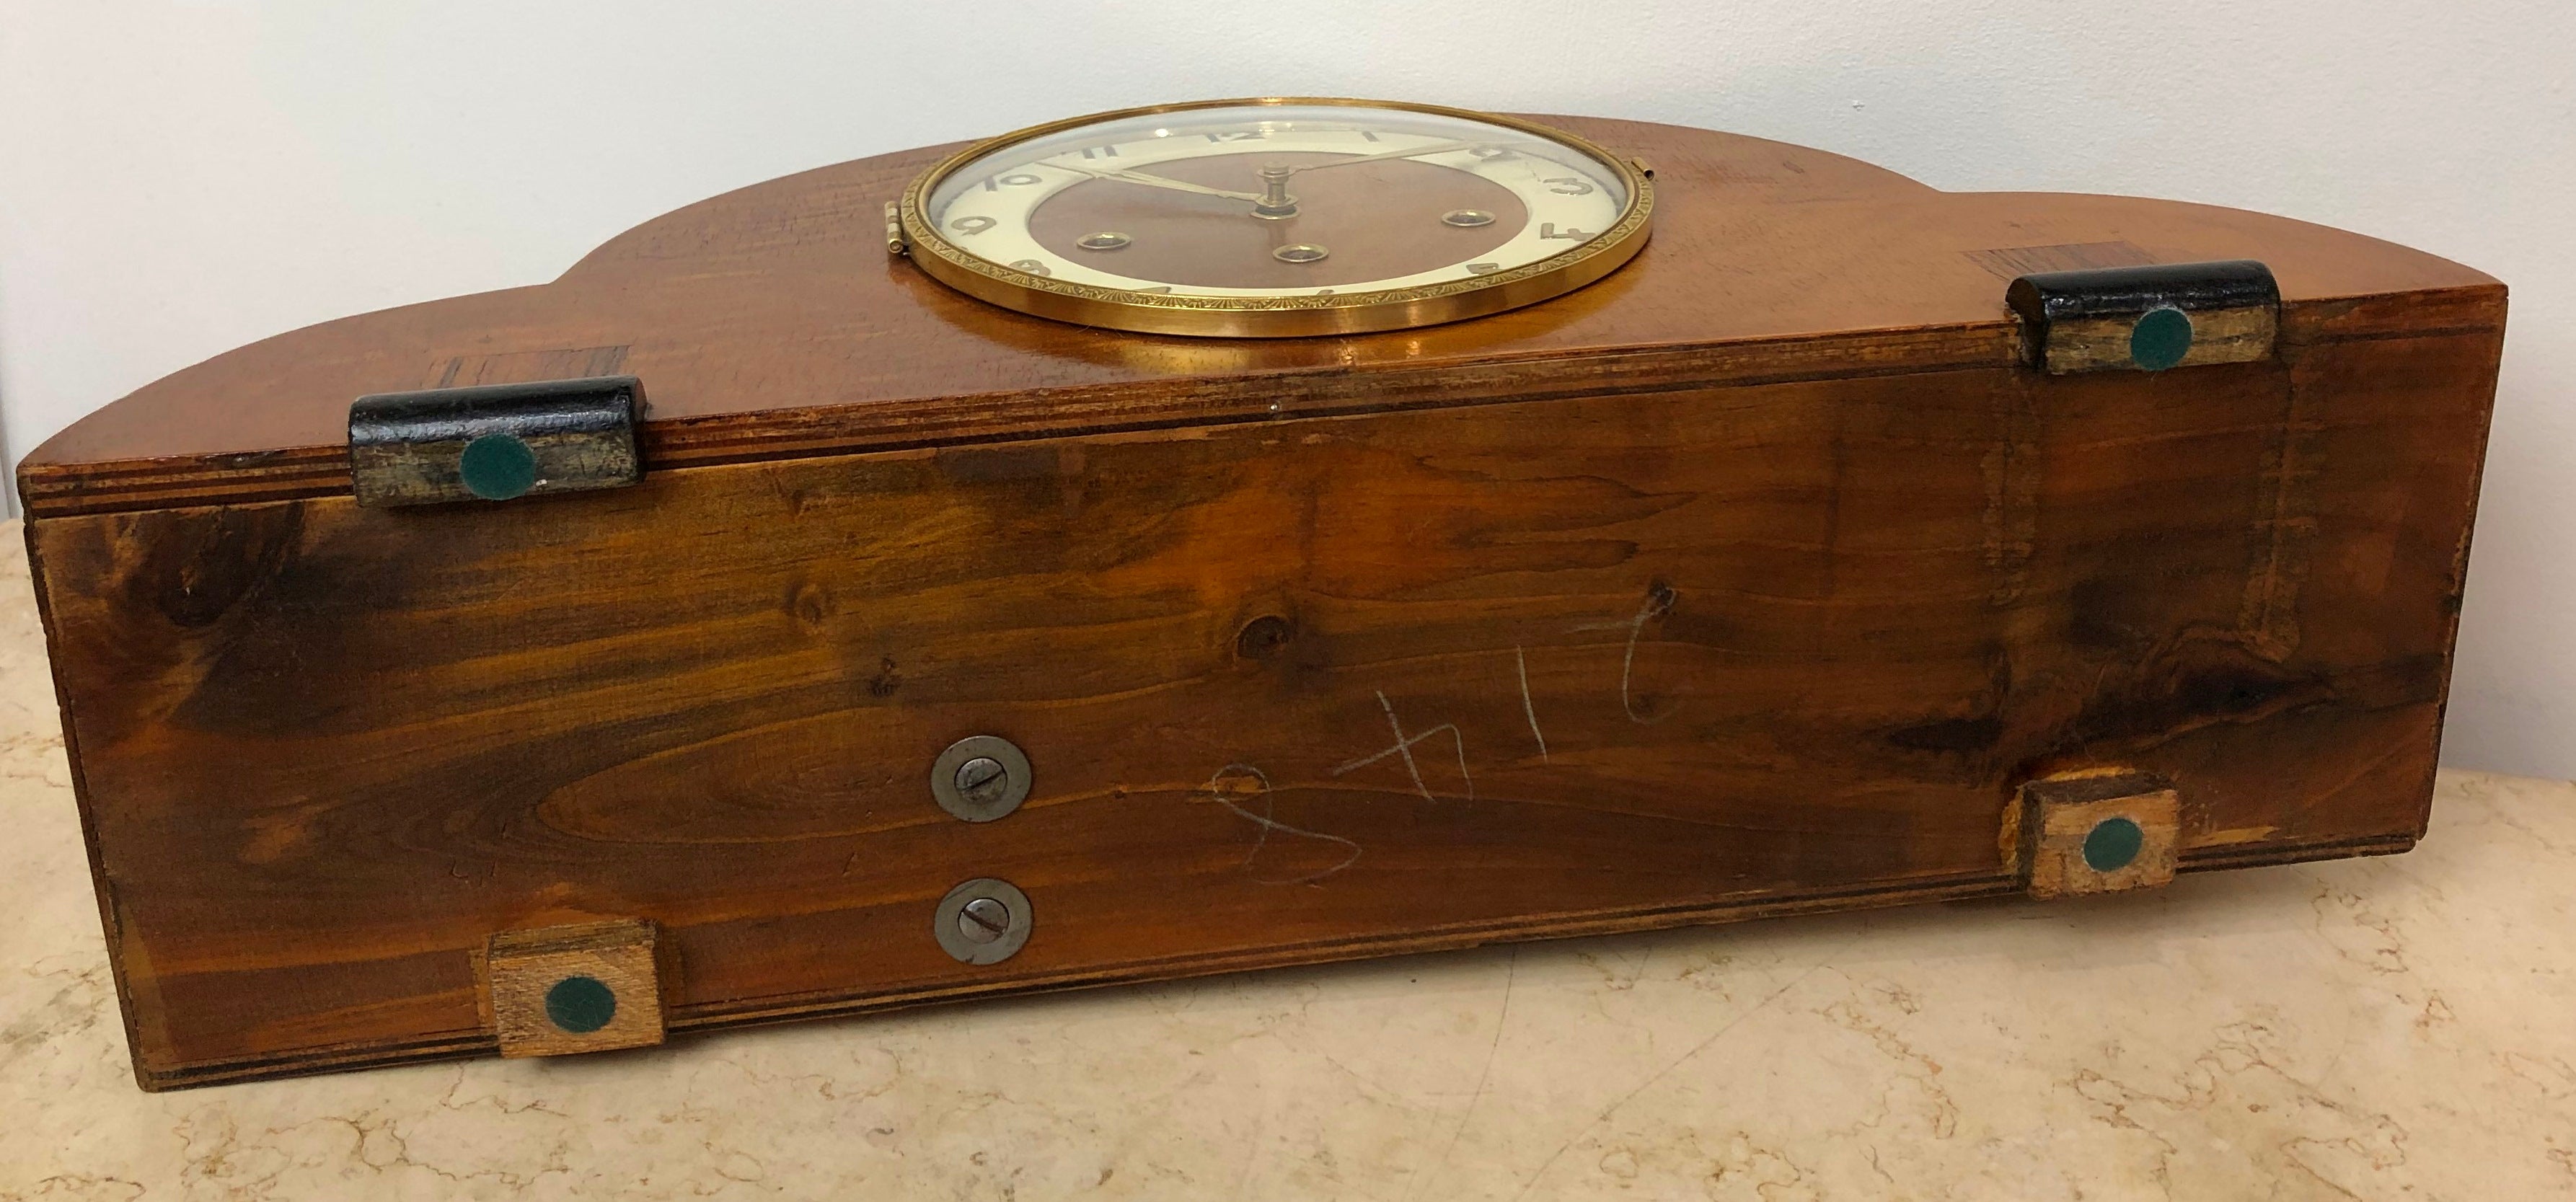 Vintage URGOS Westminster Chime Mantel Clock | eXibit collection